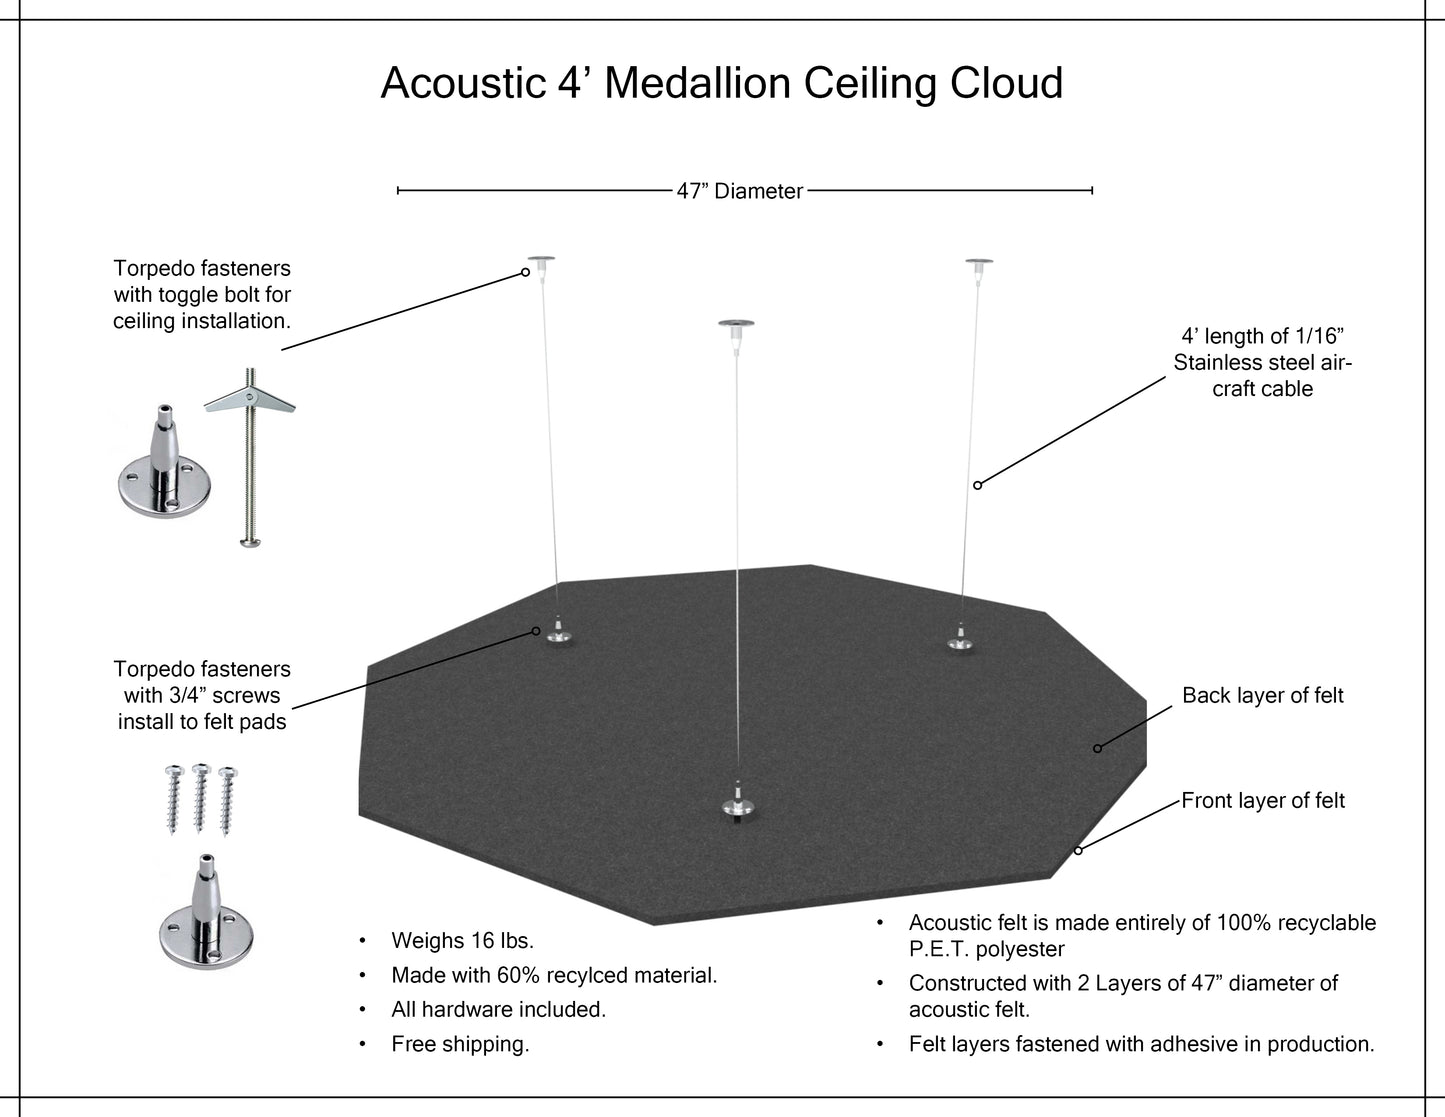 Medallion Acoustic Ceiling Cloud - 9 Points of Contact